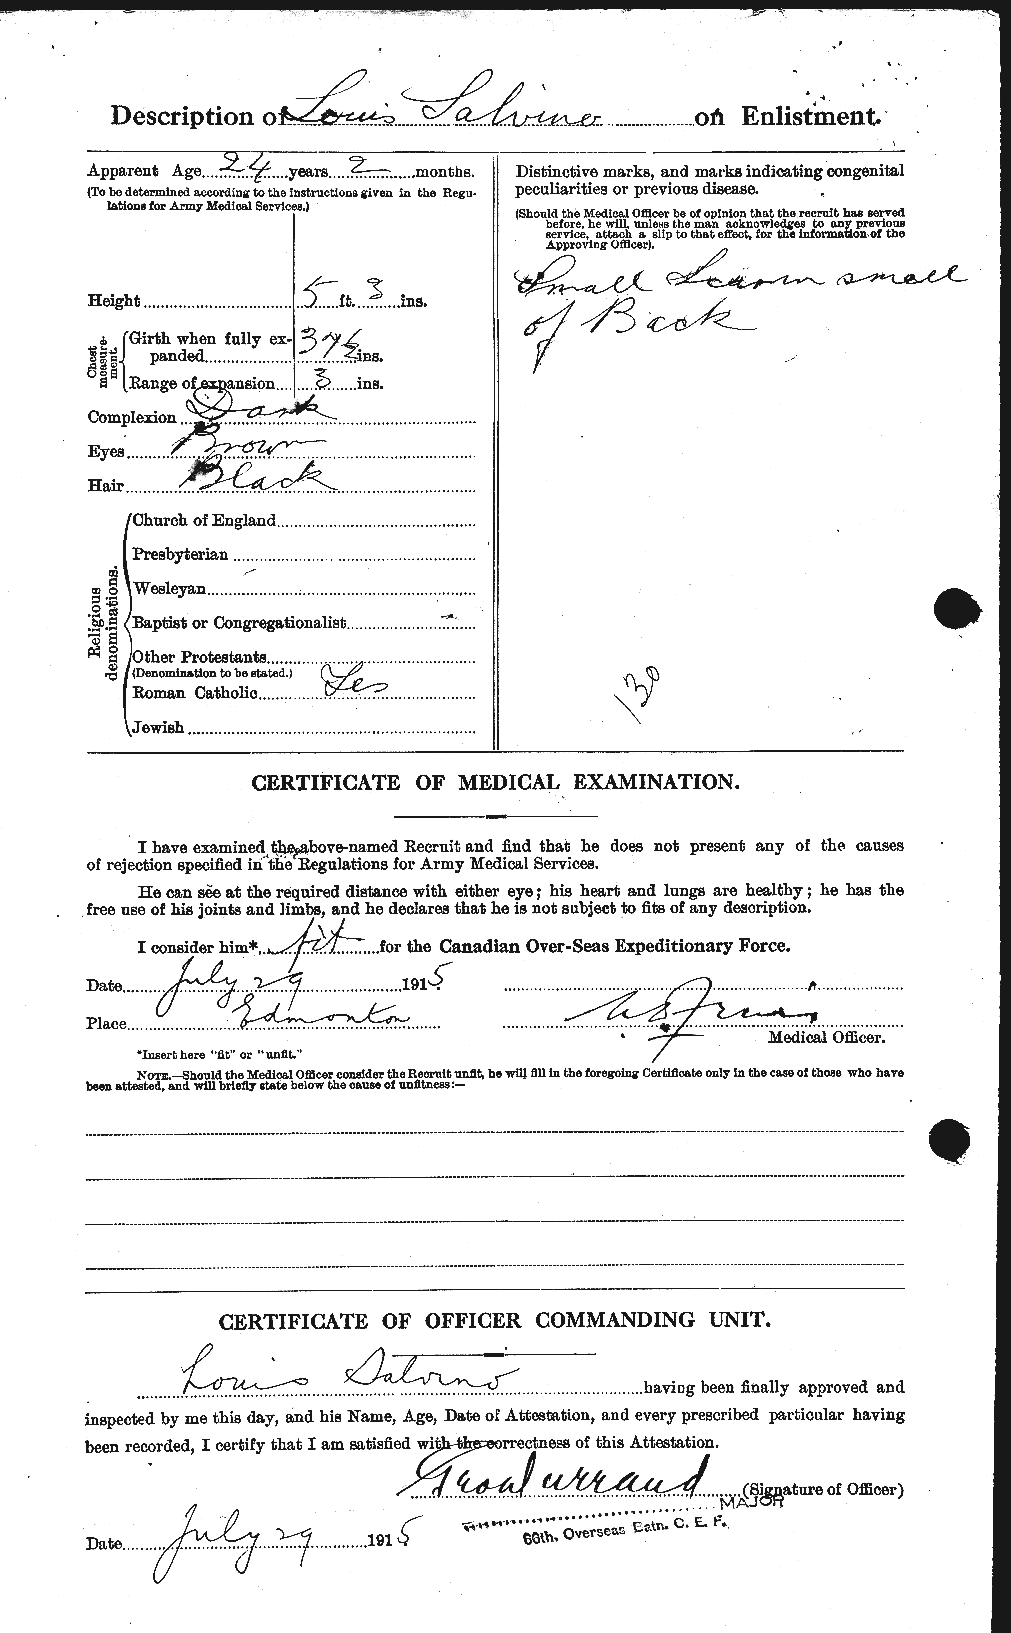 Personnel Records of the First World War - CEF 078662b